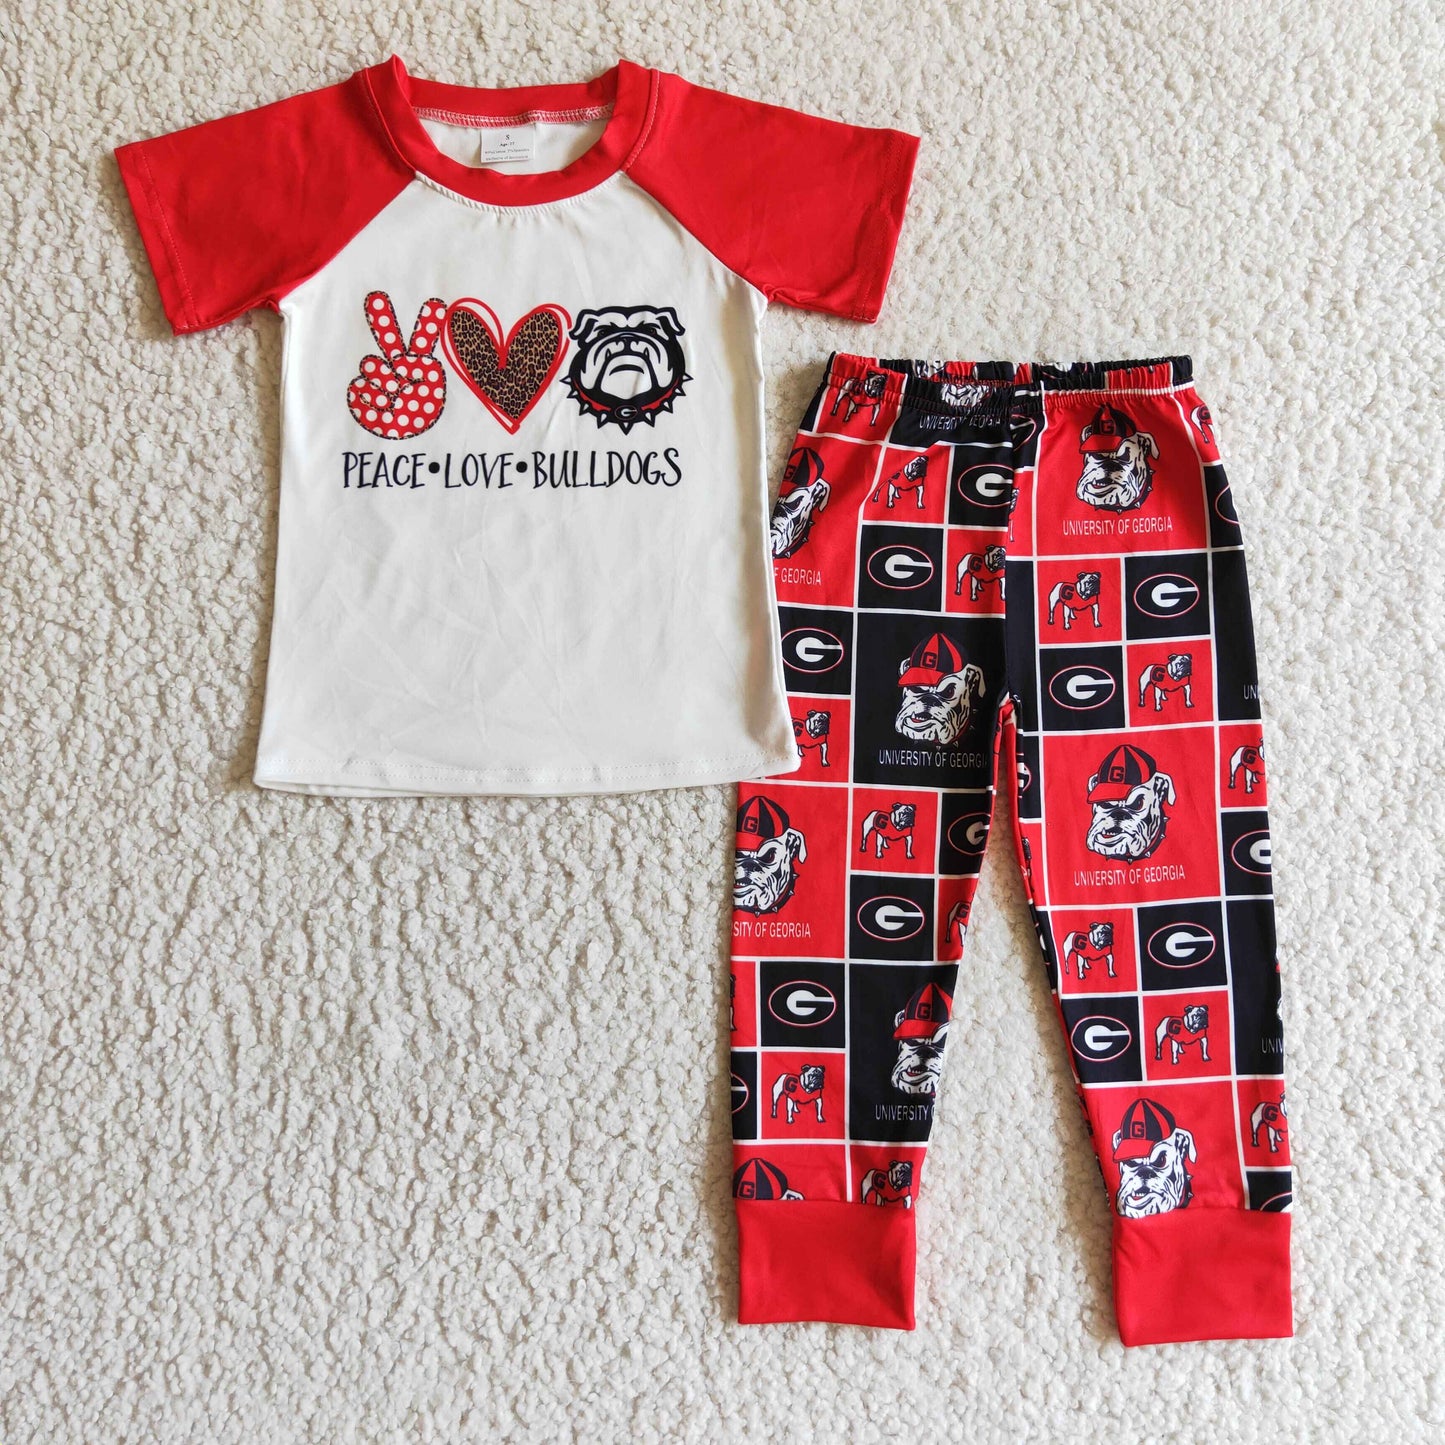 BSSO0085 Boys Team Outfits